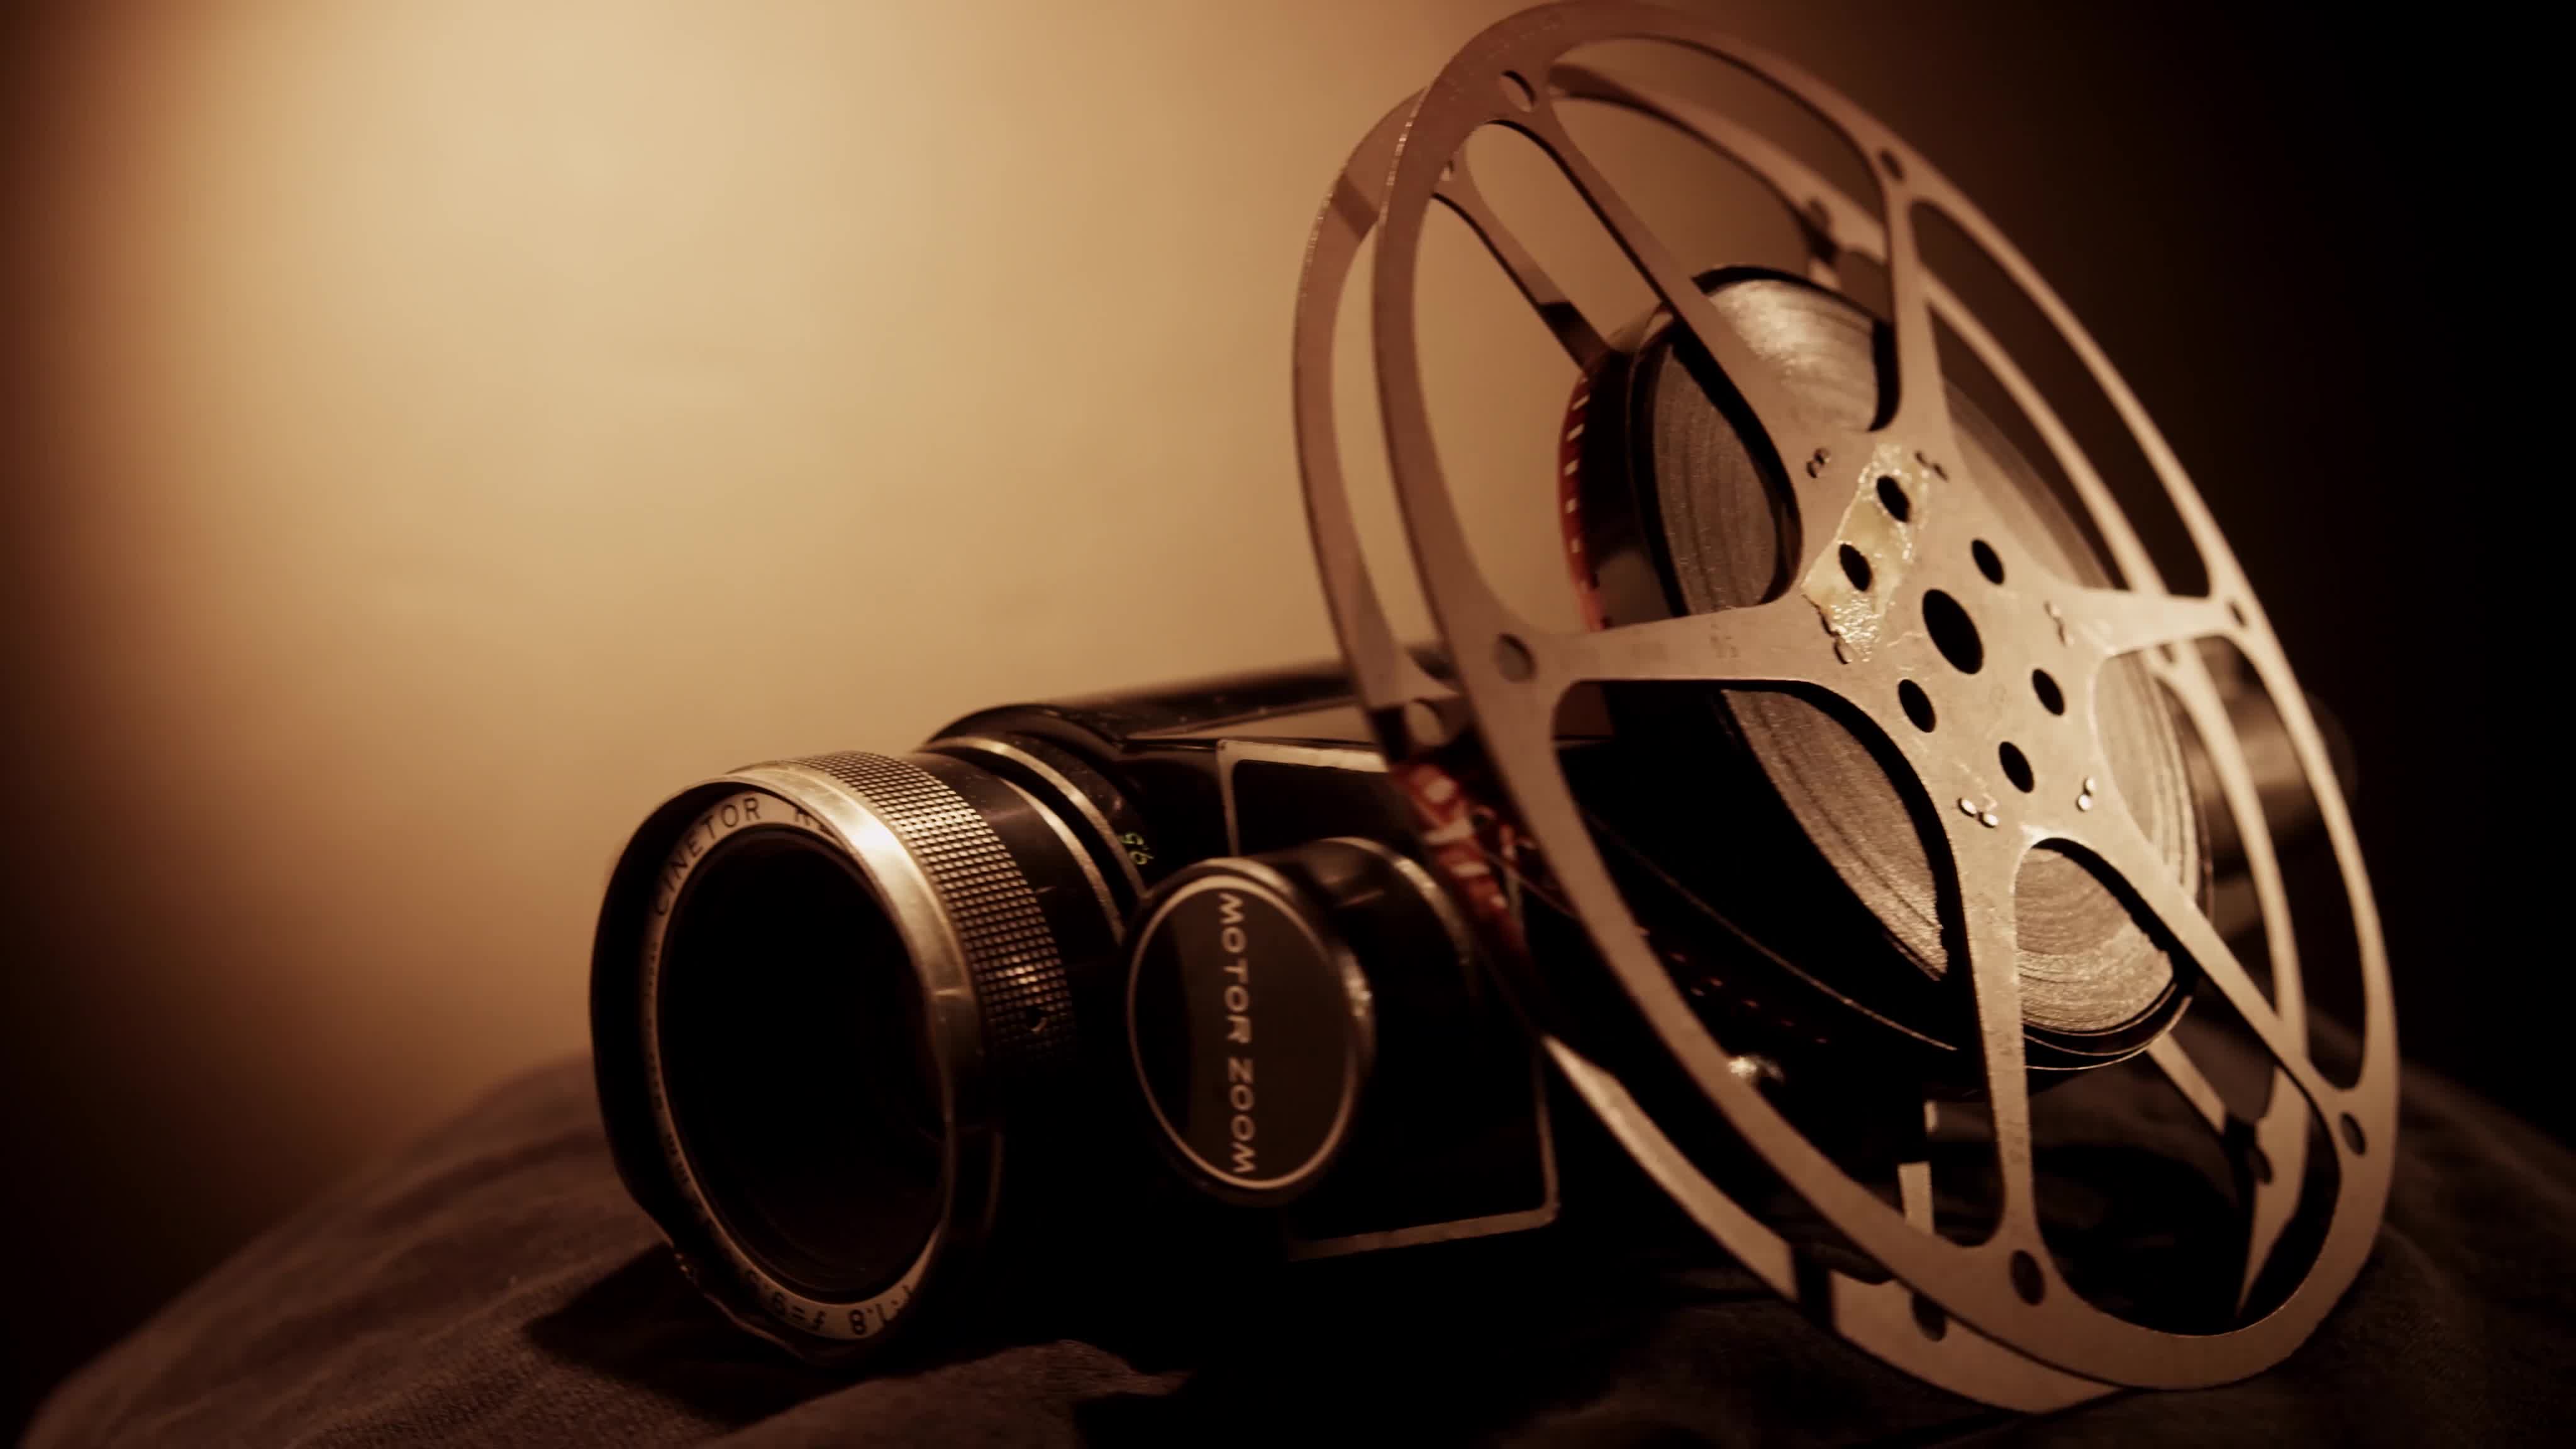 Clip of film reel and classic camera spinning with right side